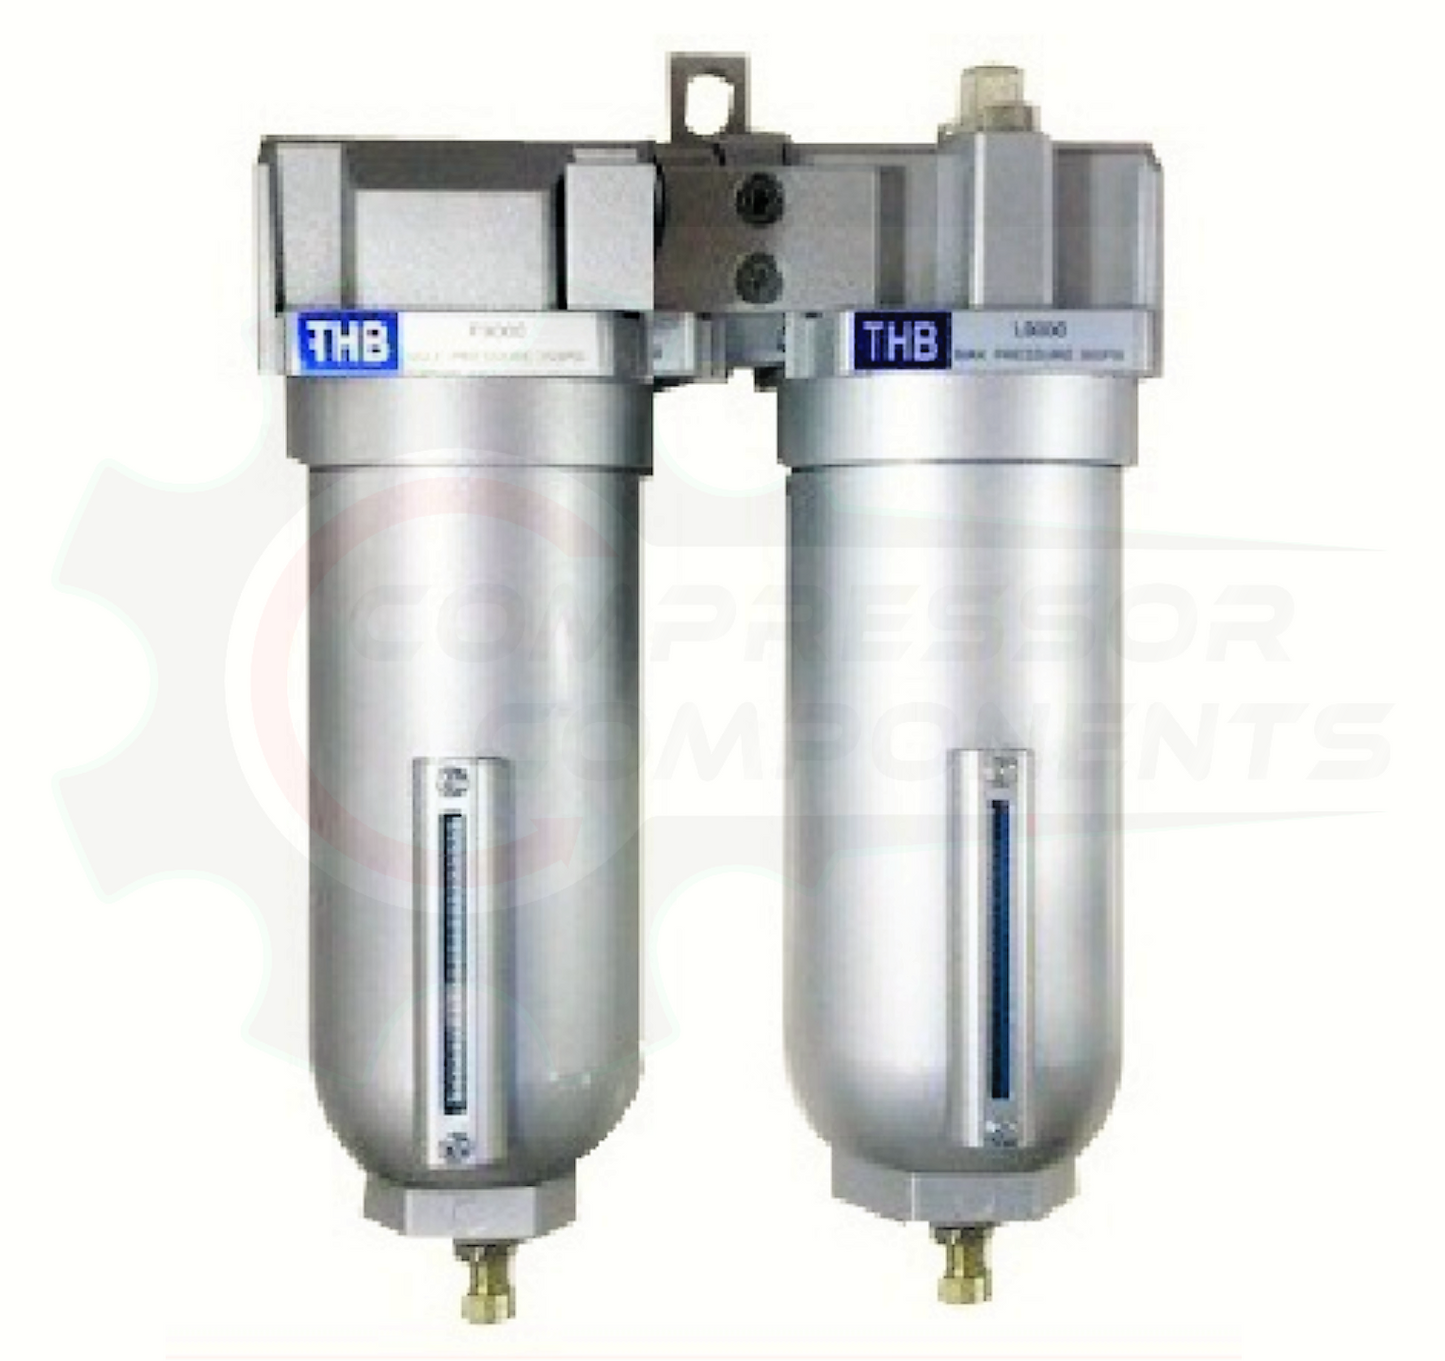 THB F90A-FM966 - 2 STAGE PARTICULATE & COALESCING FILTER COMBO - 3/4" FNPT / 155 CFM